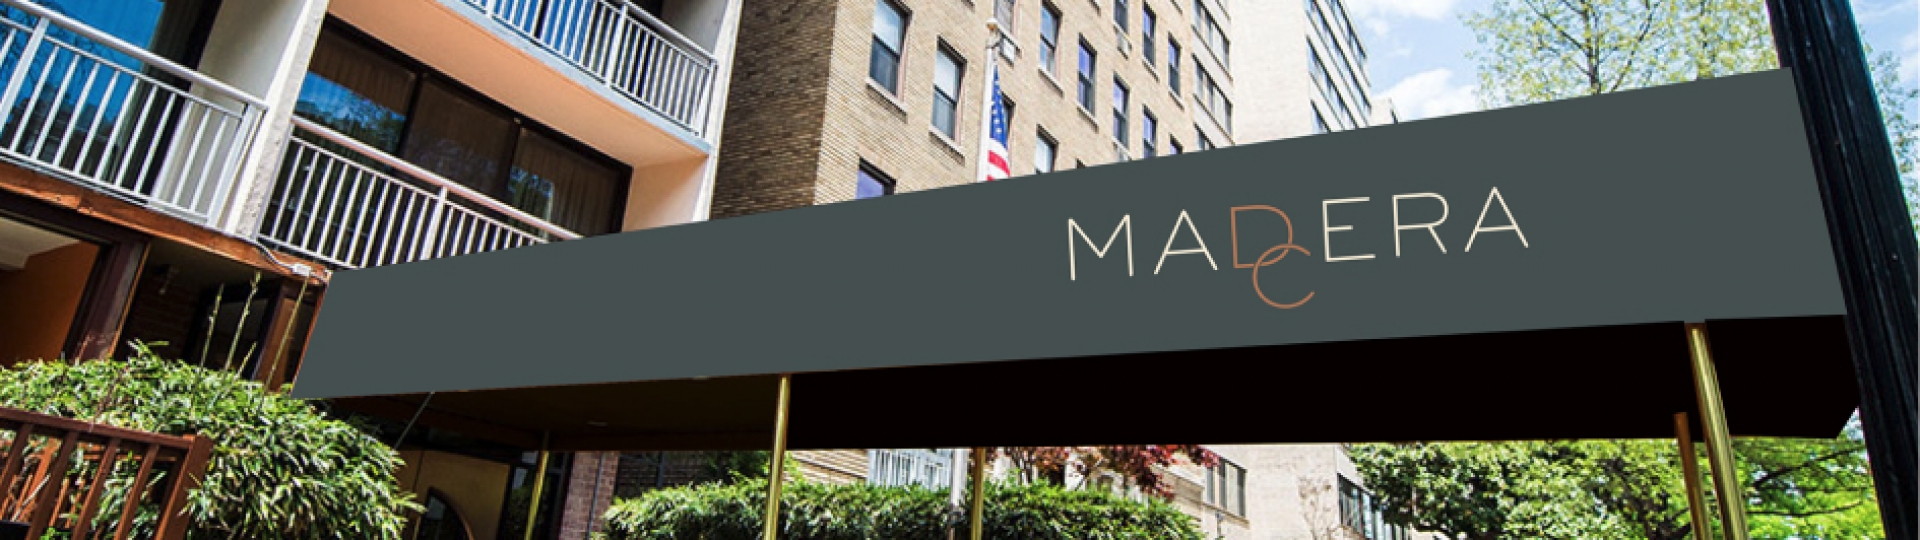 The Hotel Madera entrance awning on New Hampshire Ave.